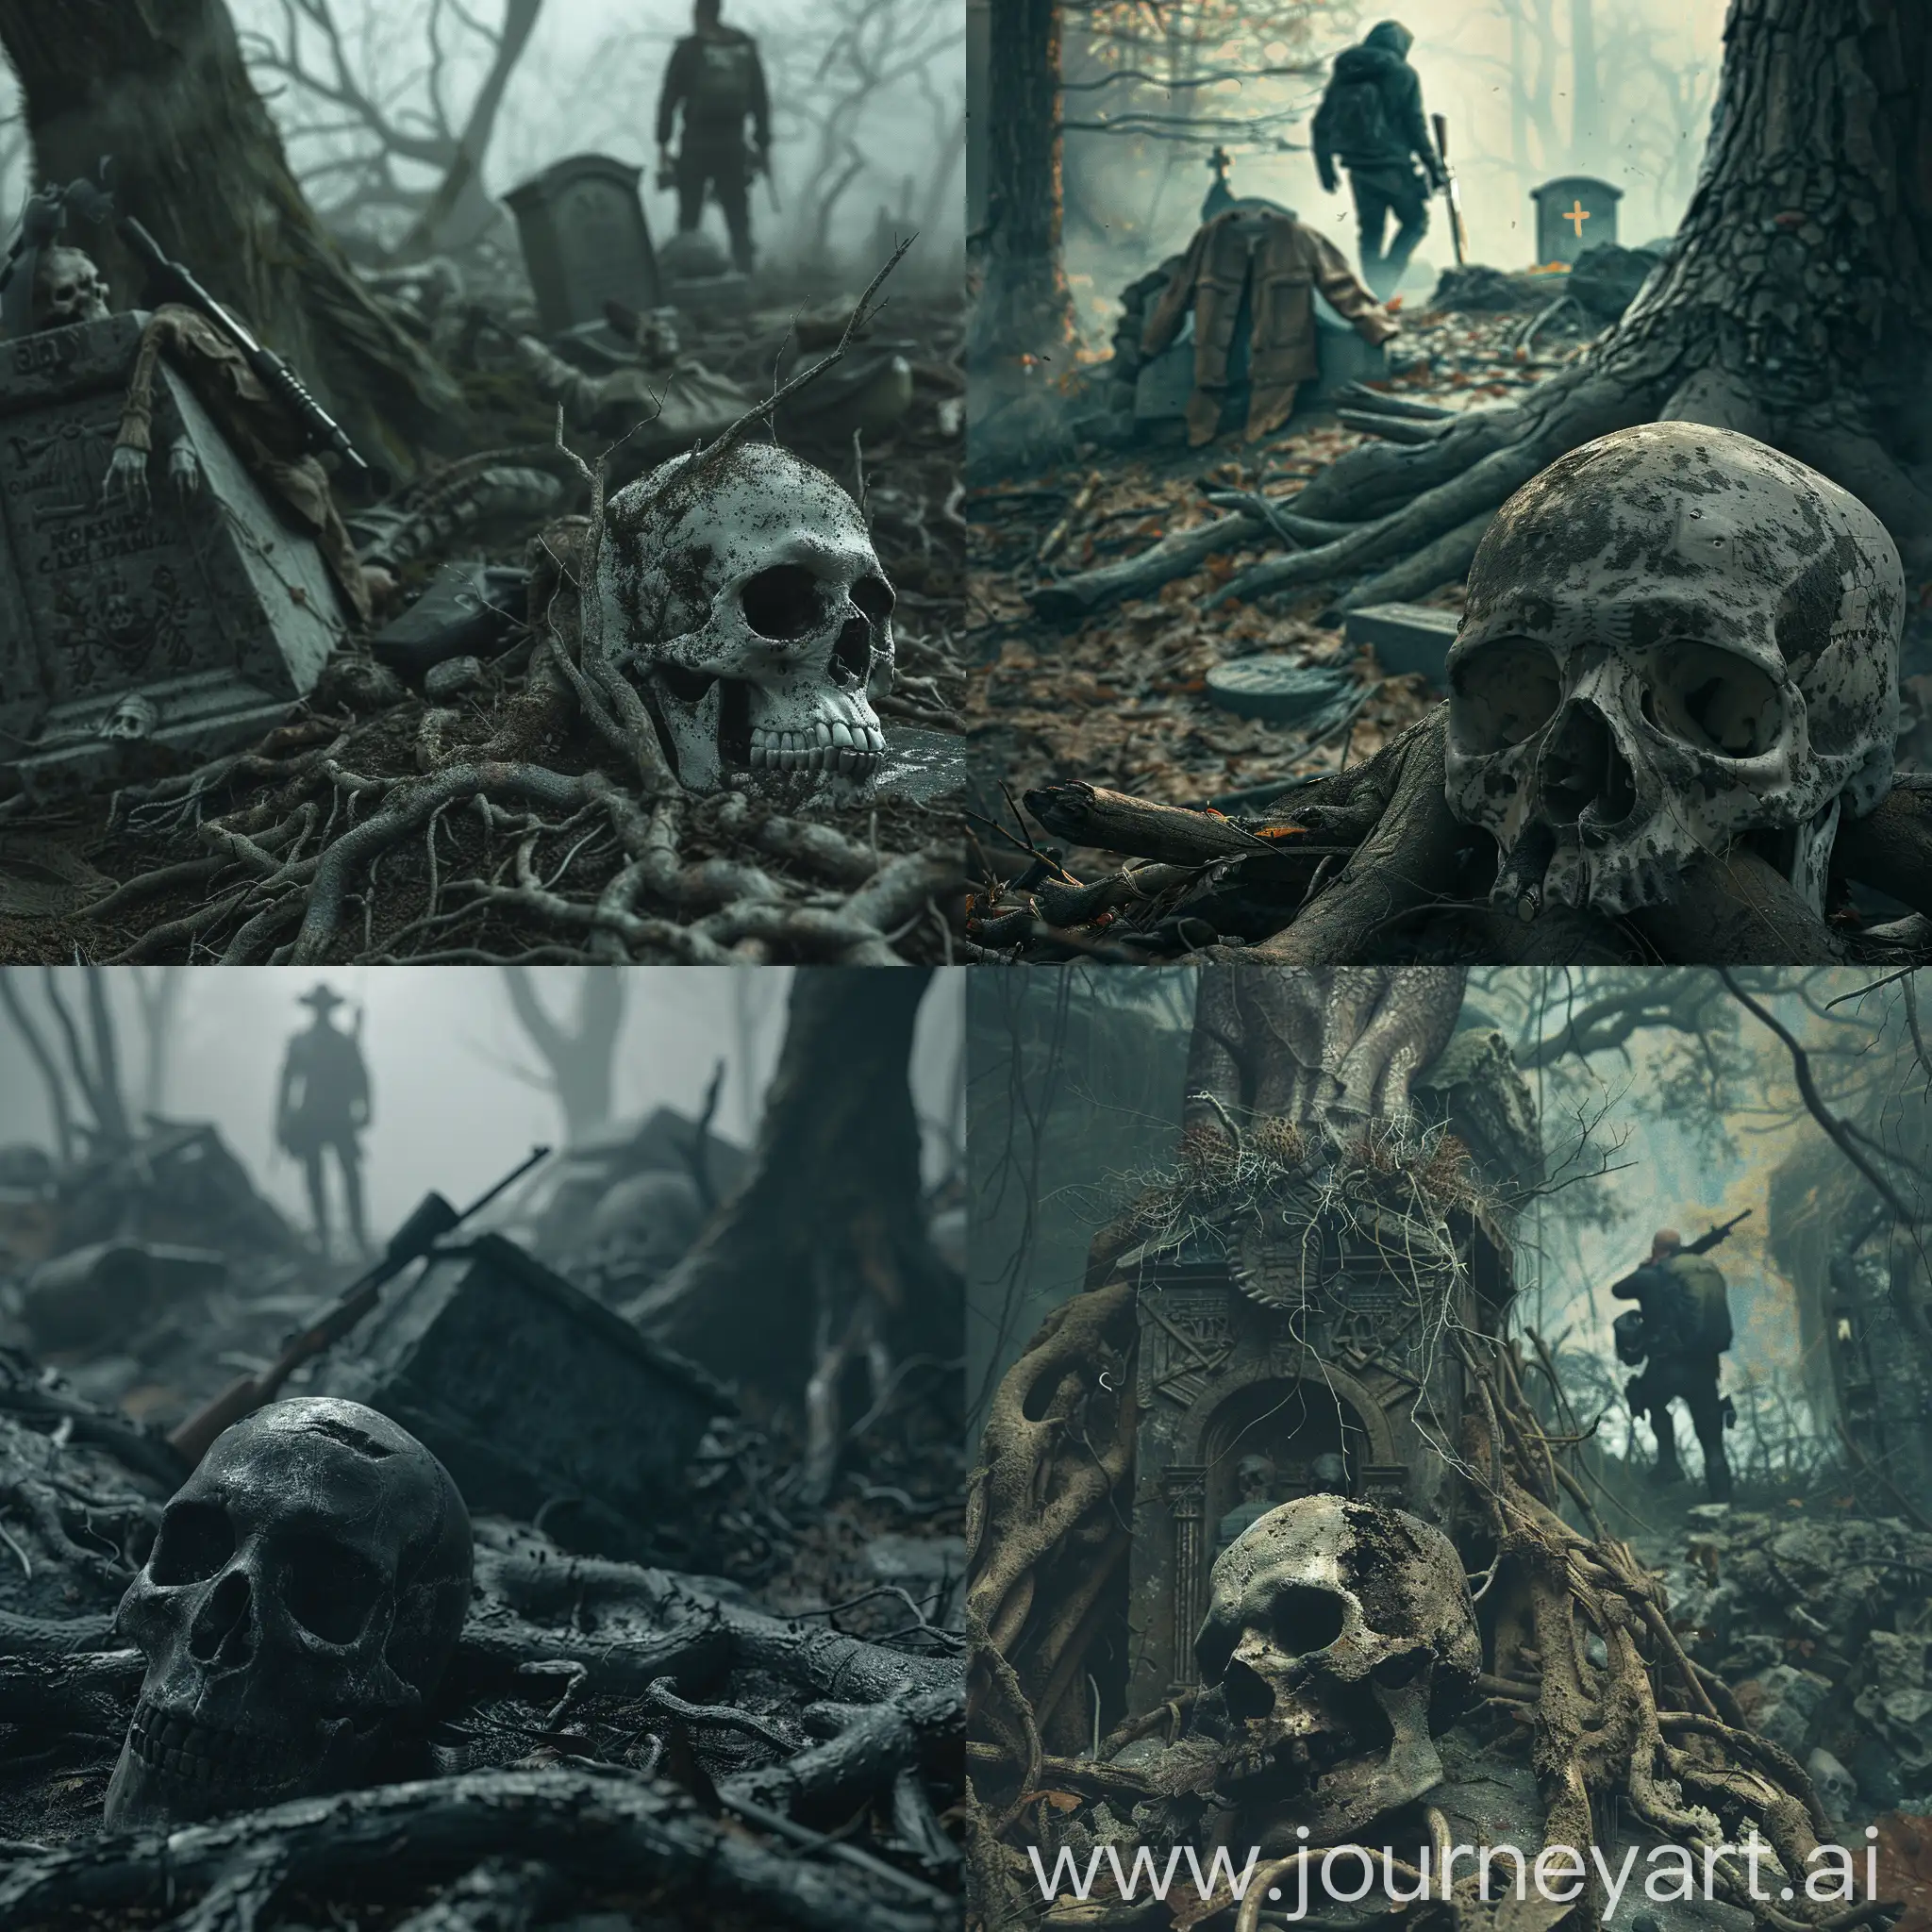 In the foreground is a 1skull, a tomb, tree roots, in the distance there is a hunter, a gun, an old jacket, a gloomy atmosphere, a horror film, hyper-realism, 8K Image Quality, Ultra Detail